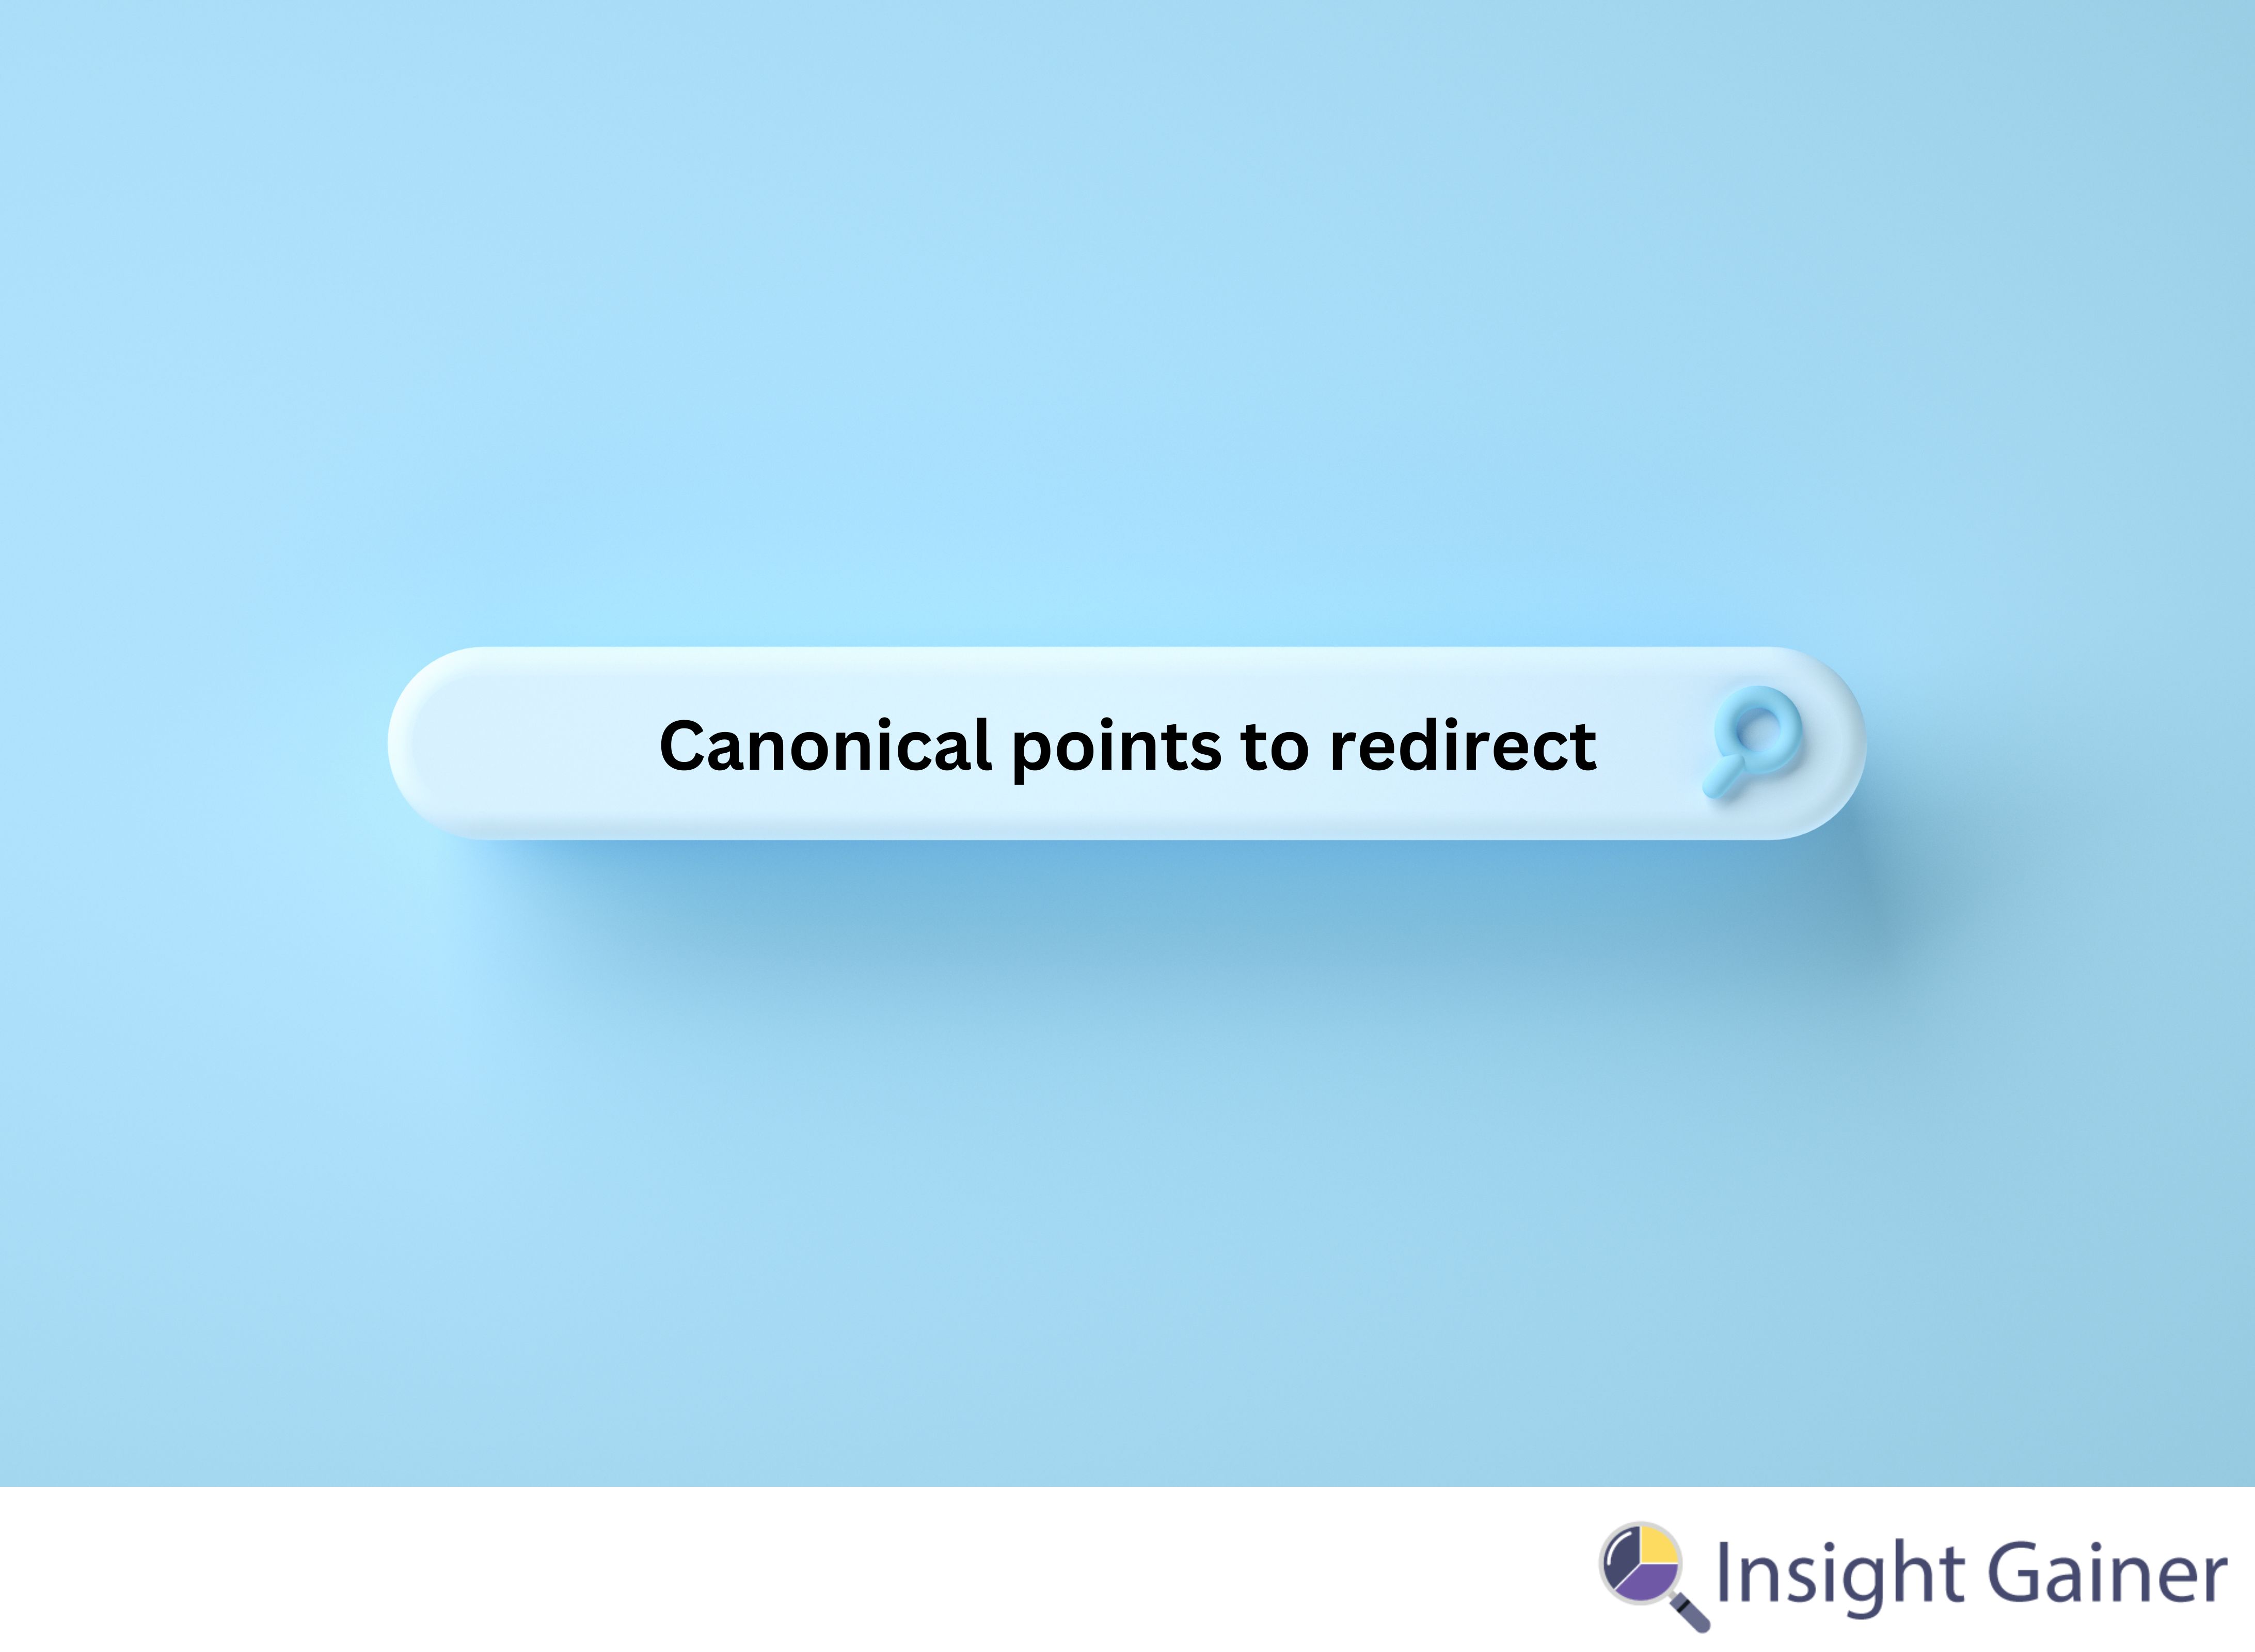 What does Canonical points to redirect mean